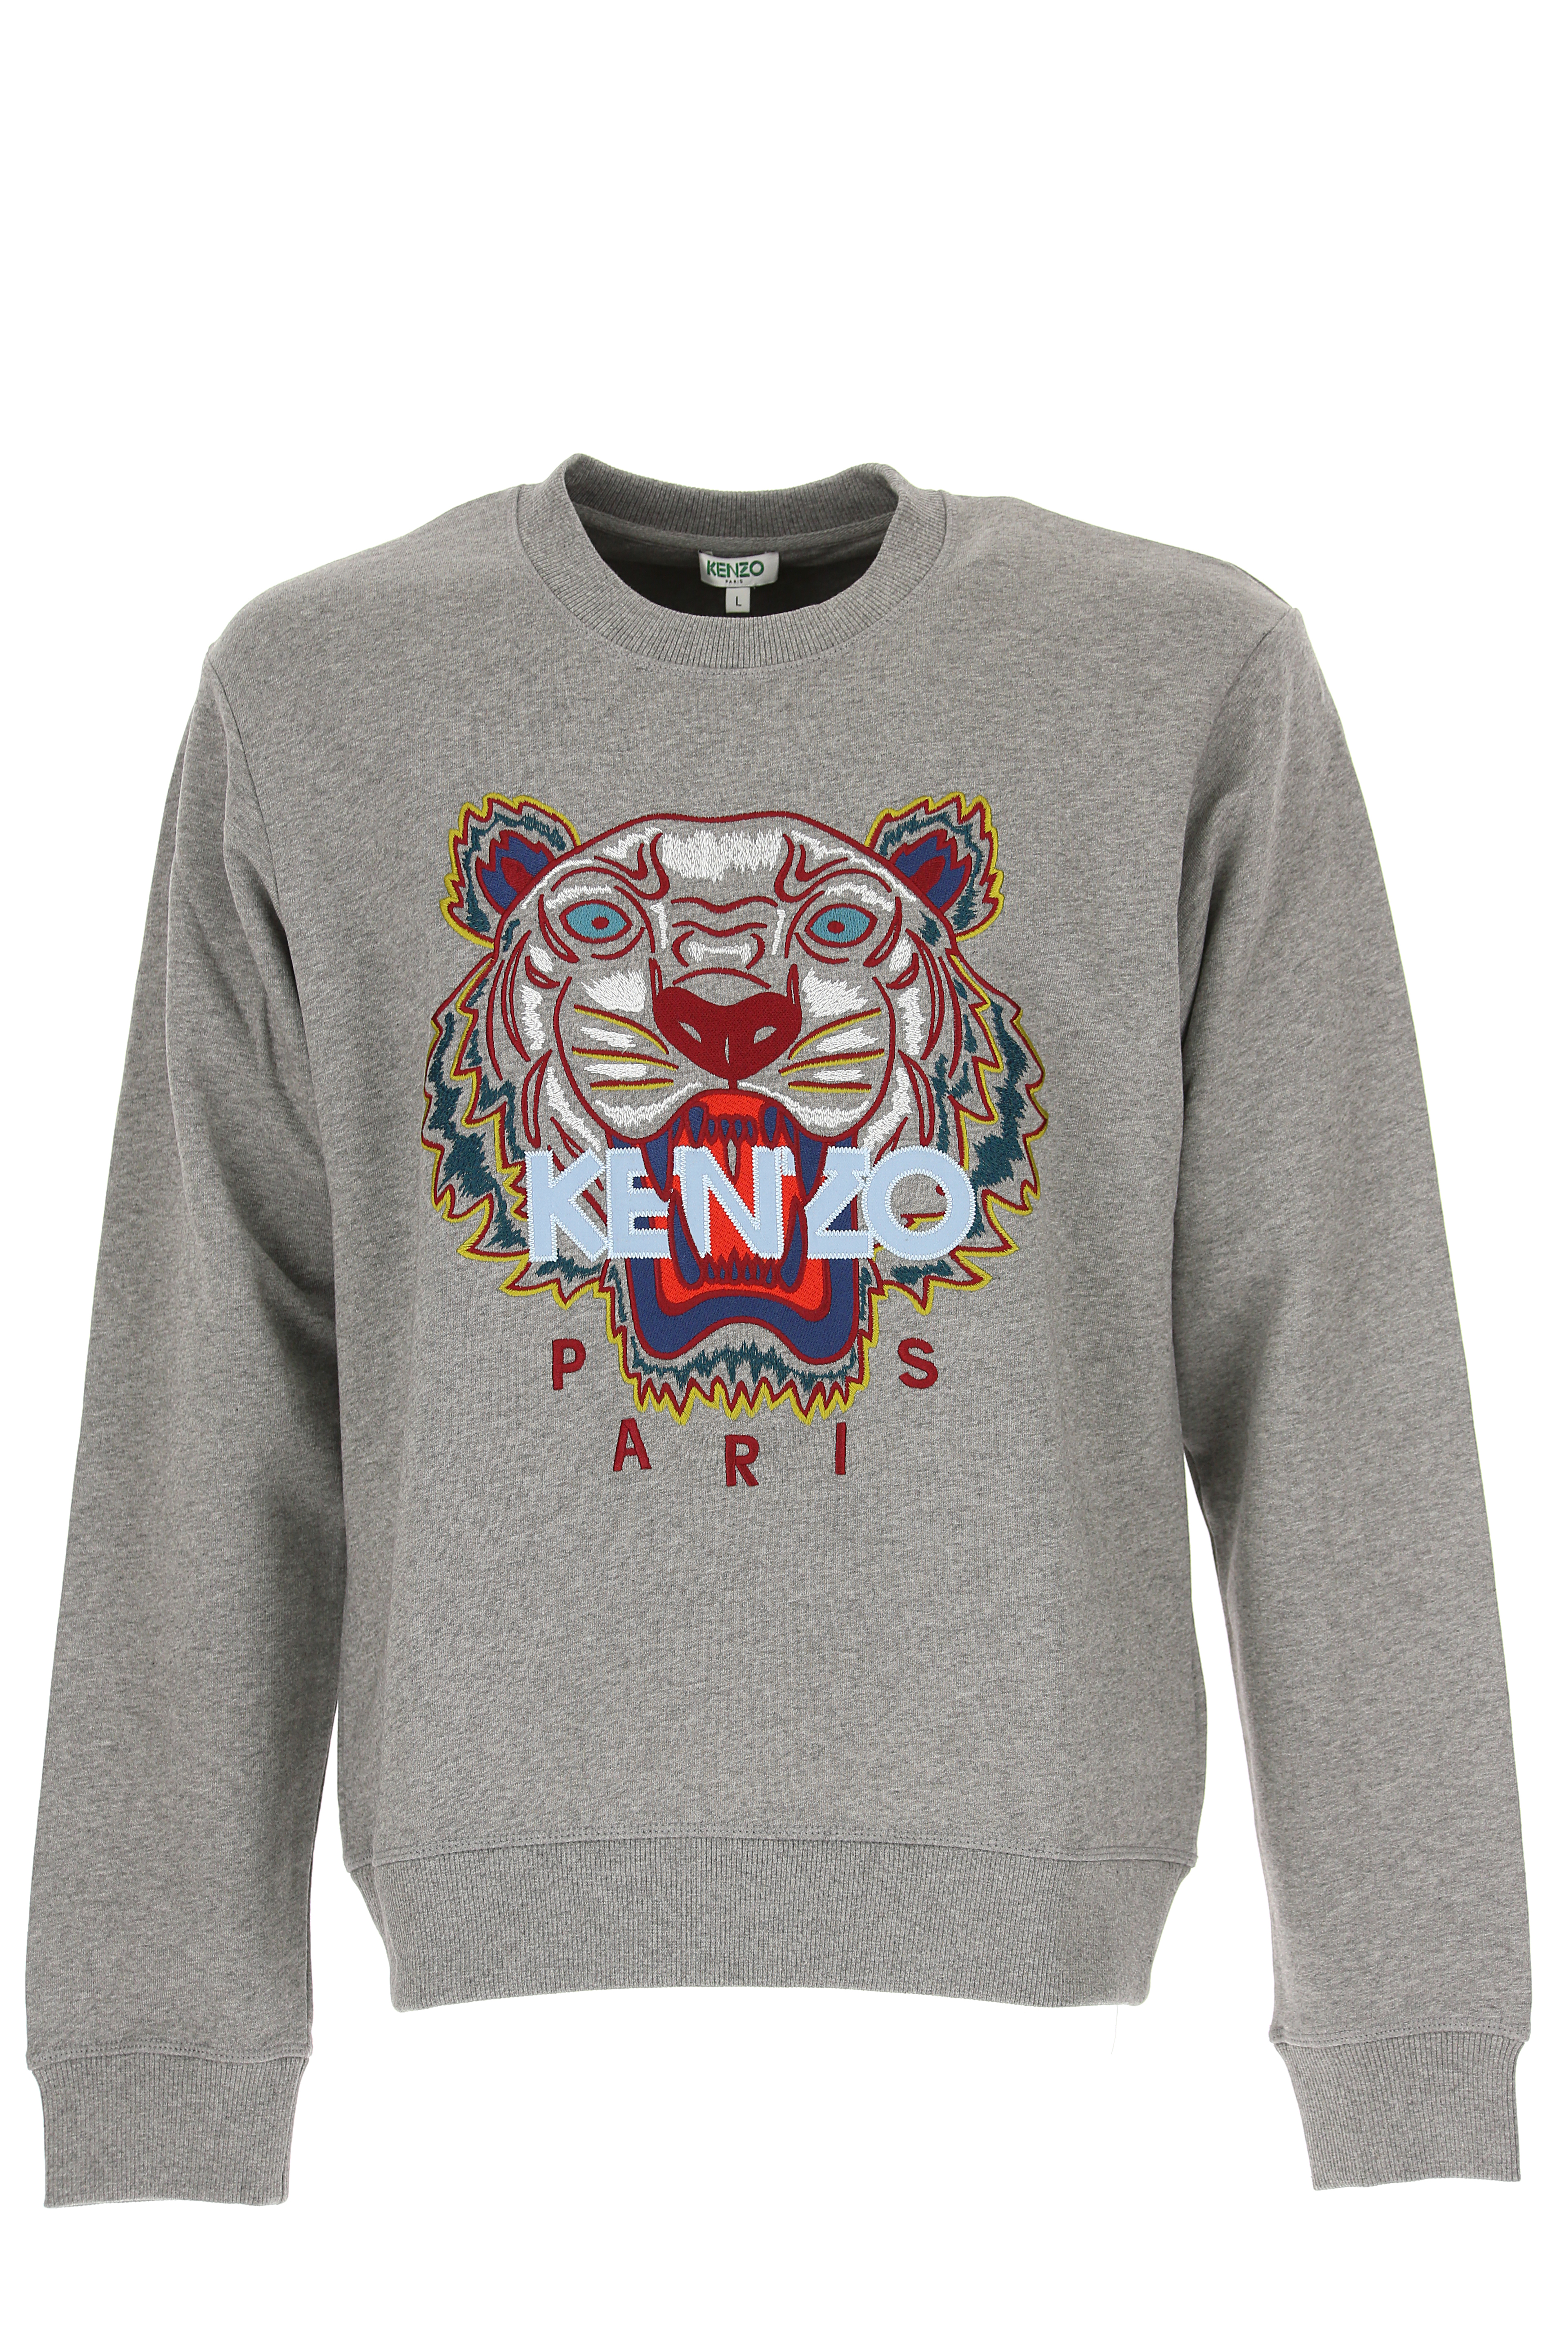 kenzo outlet germany - 54% remise 